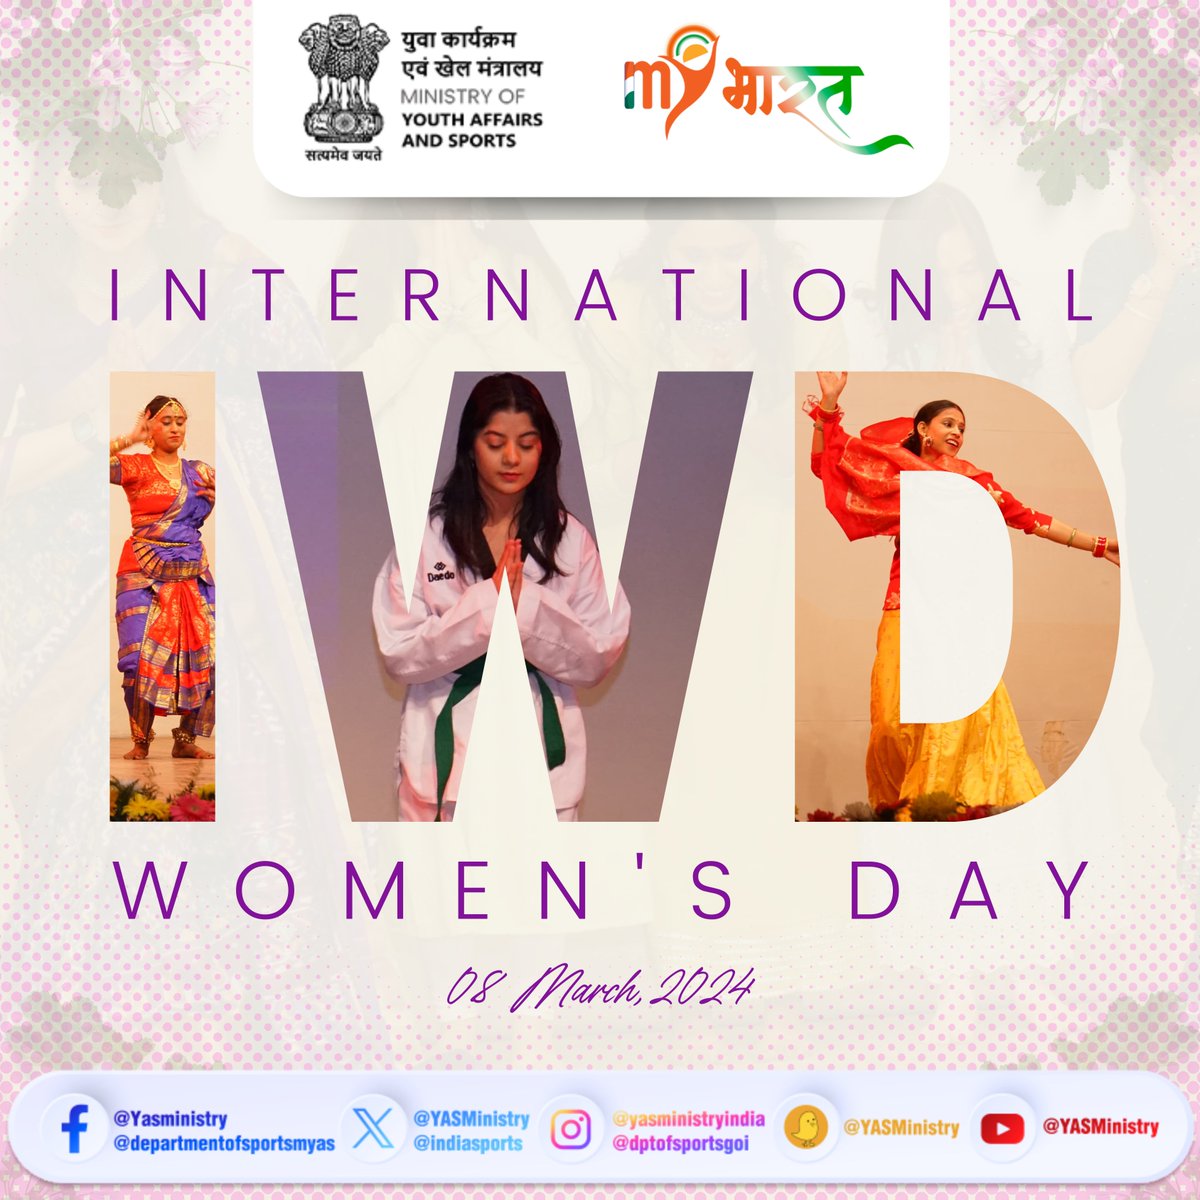 Empowering the Nation, starting from our workplaces! Celebrating the untiring spirit of women by investing in them and accelerating progress at @yasministry and beyond, leading the way towards #Viksitbharat. Happy Women's Day to all the incredible women shaping our future! ⭐️